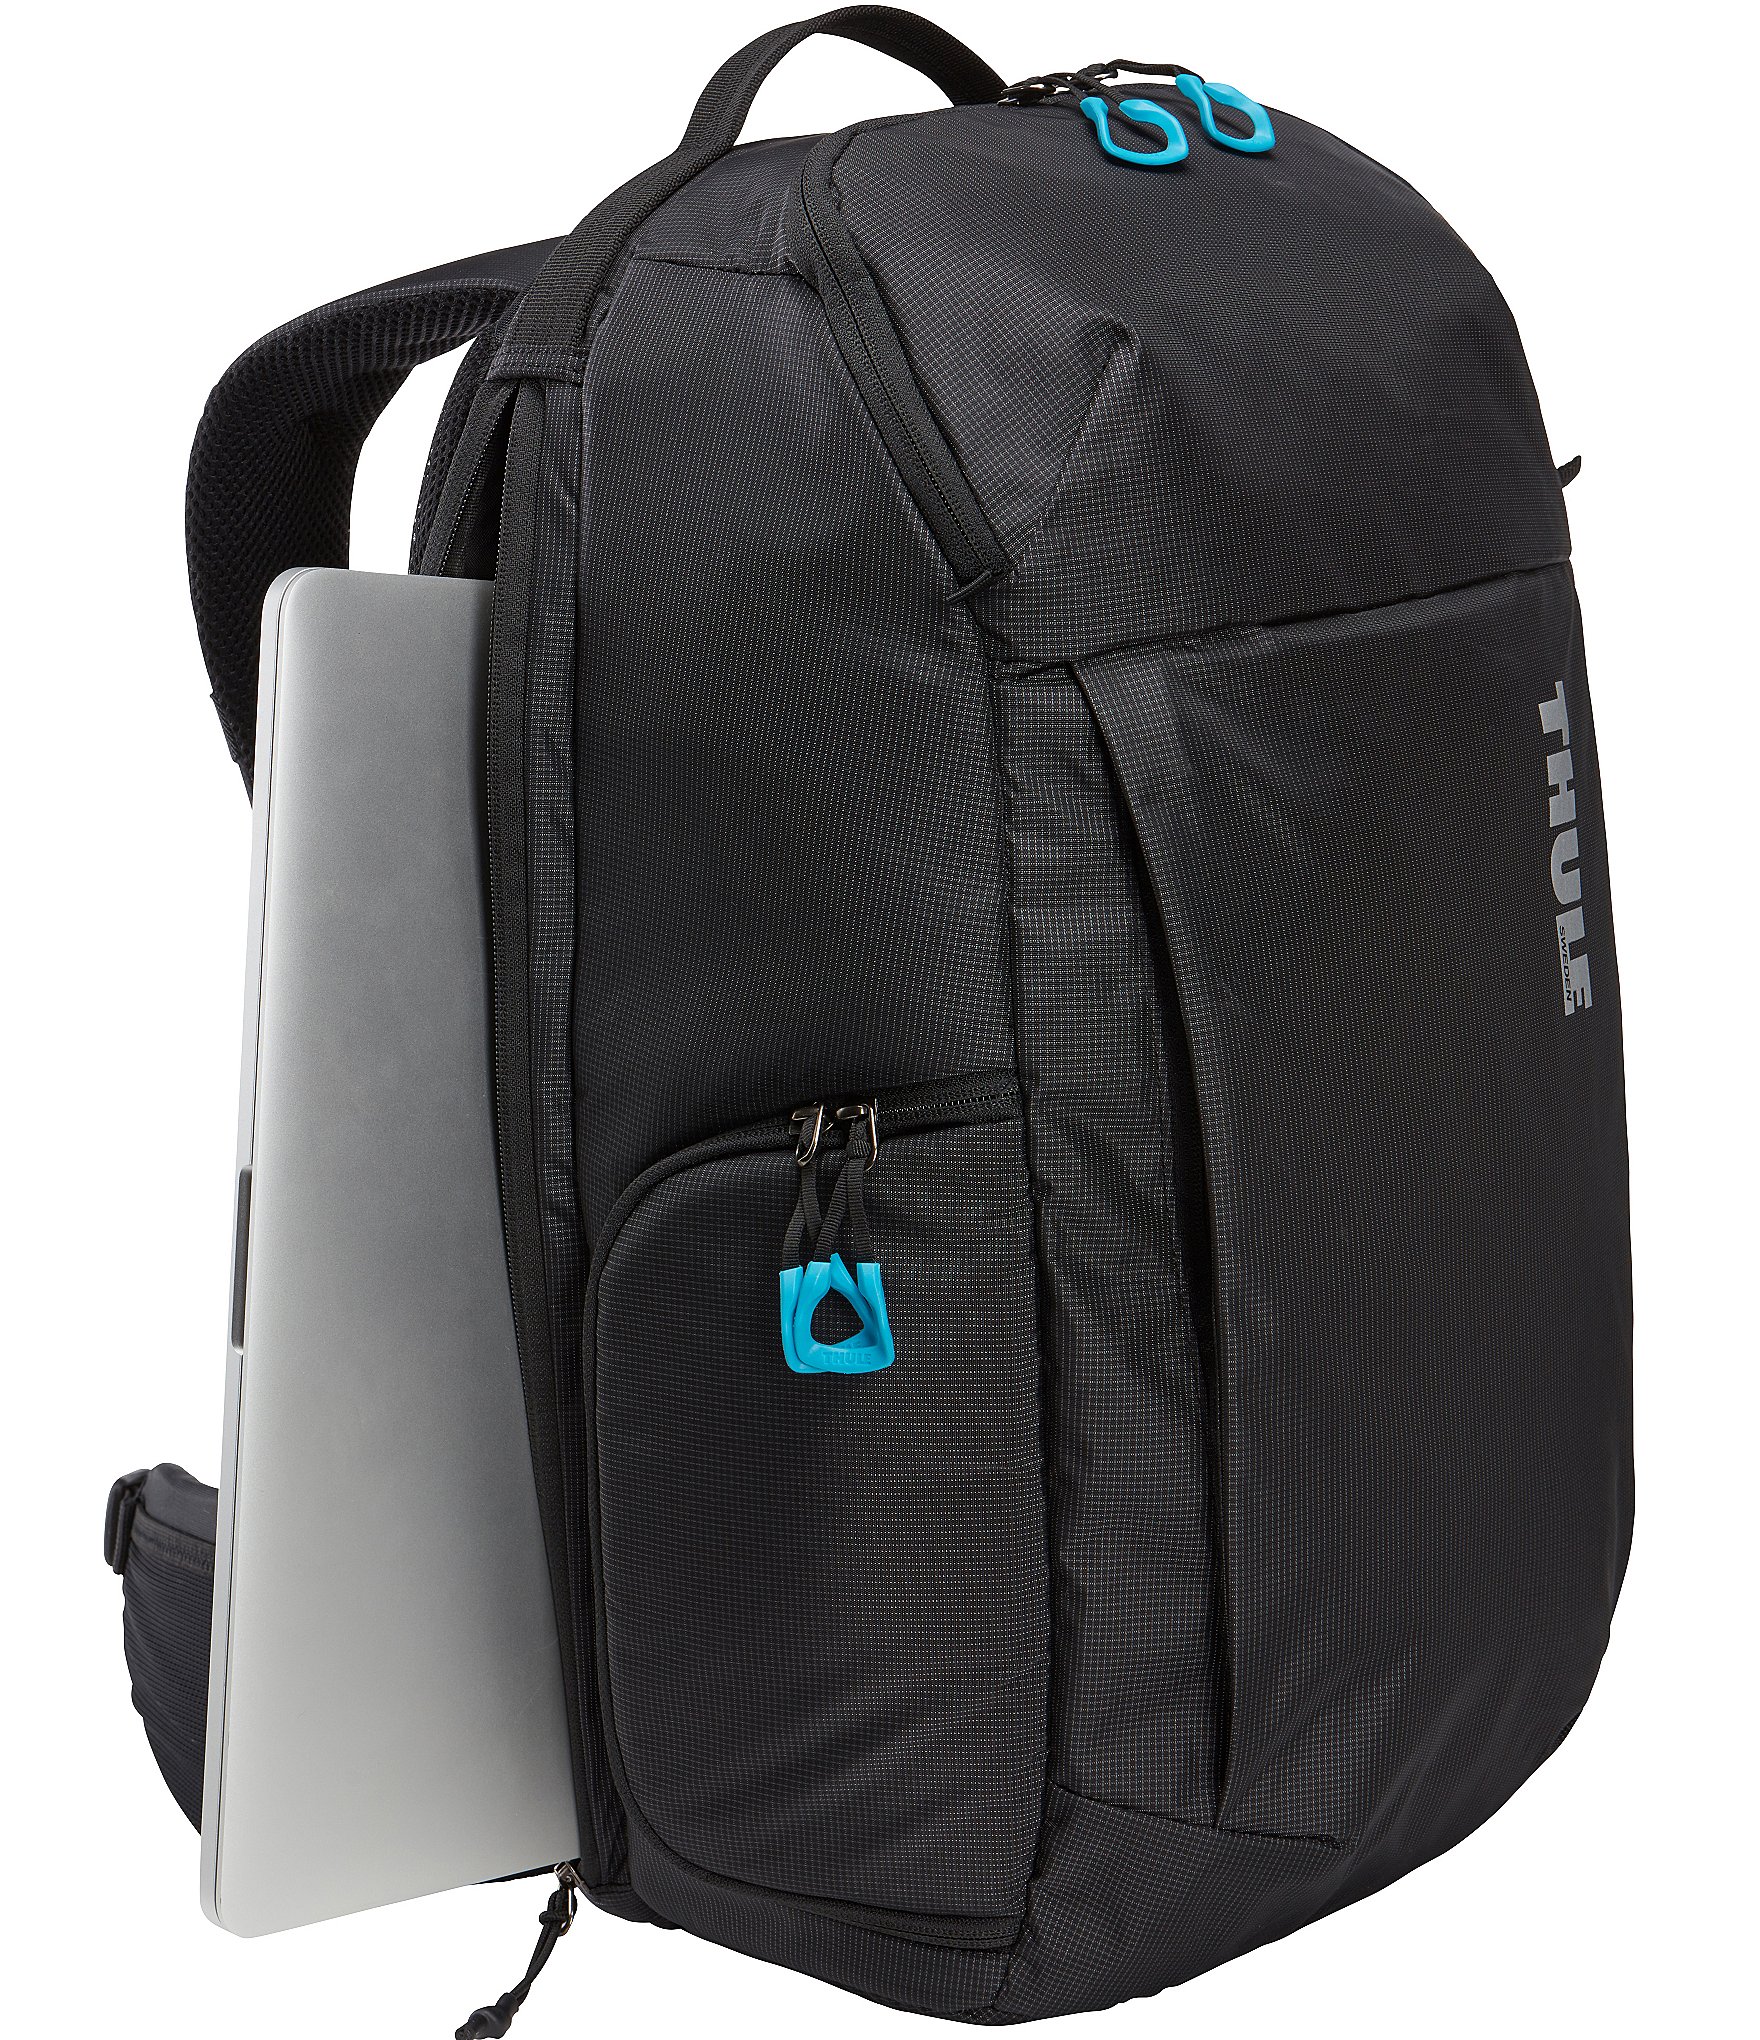 Camera Backpack Bag with Laptop Compartment 15.6